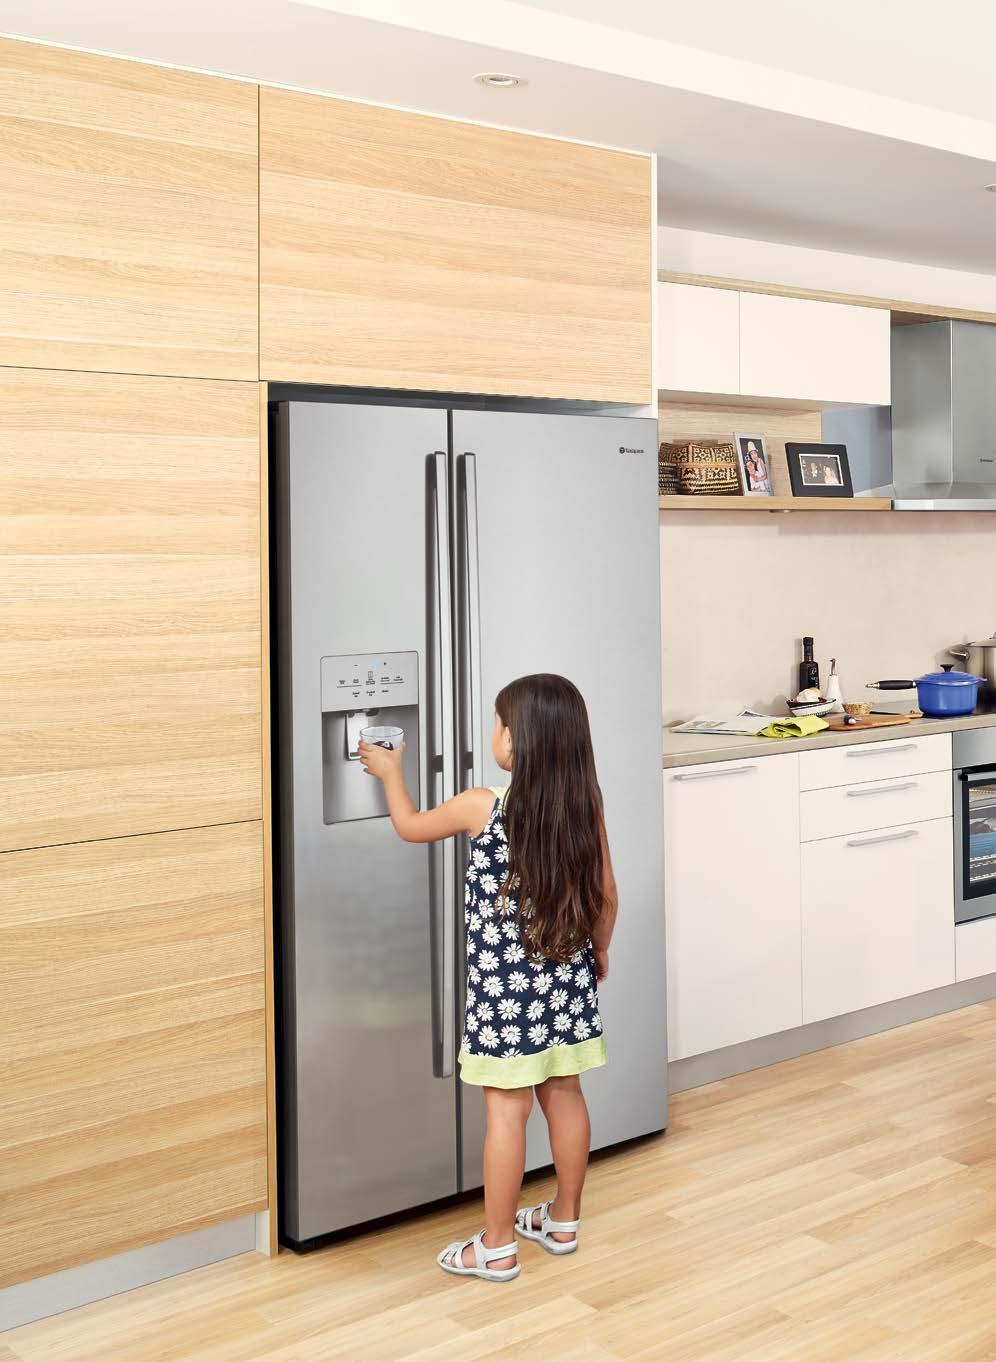 ealthy, continuous fresh water Enjoy the convenience of endless refreshment with quick access to chilled, filtered water from the slimline in-door water dispenser.